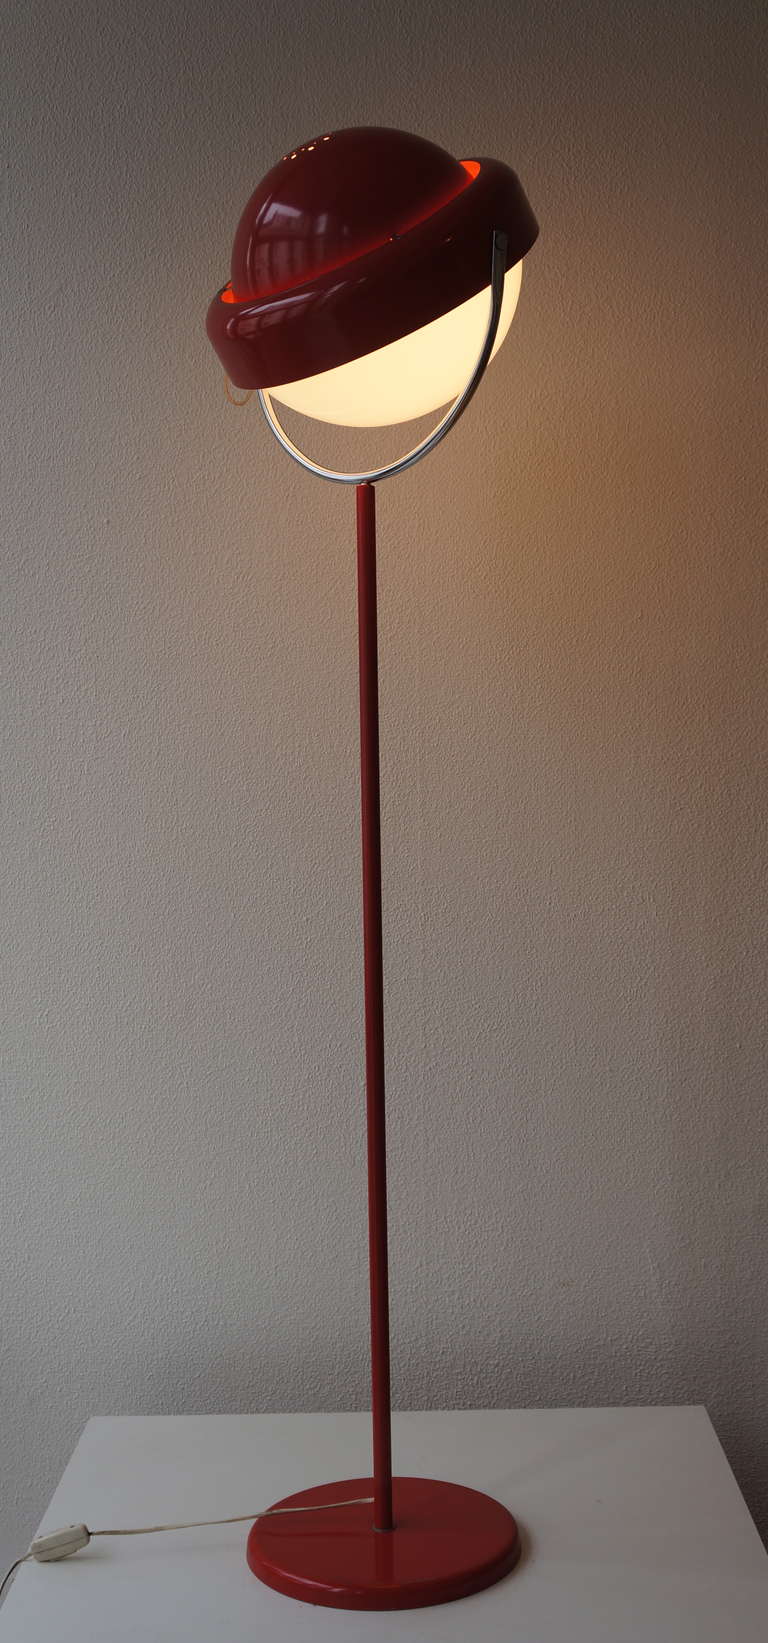 Floor lamp by Uno Dahlen for Aneta.
In red lacquer metal and plastic shade.
Original tag, Sweden, 1960s.